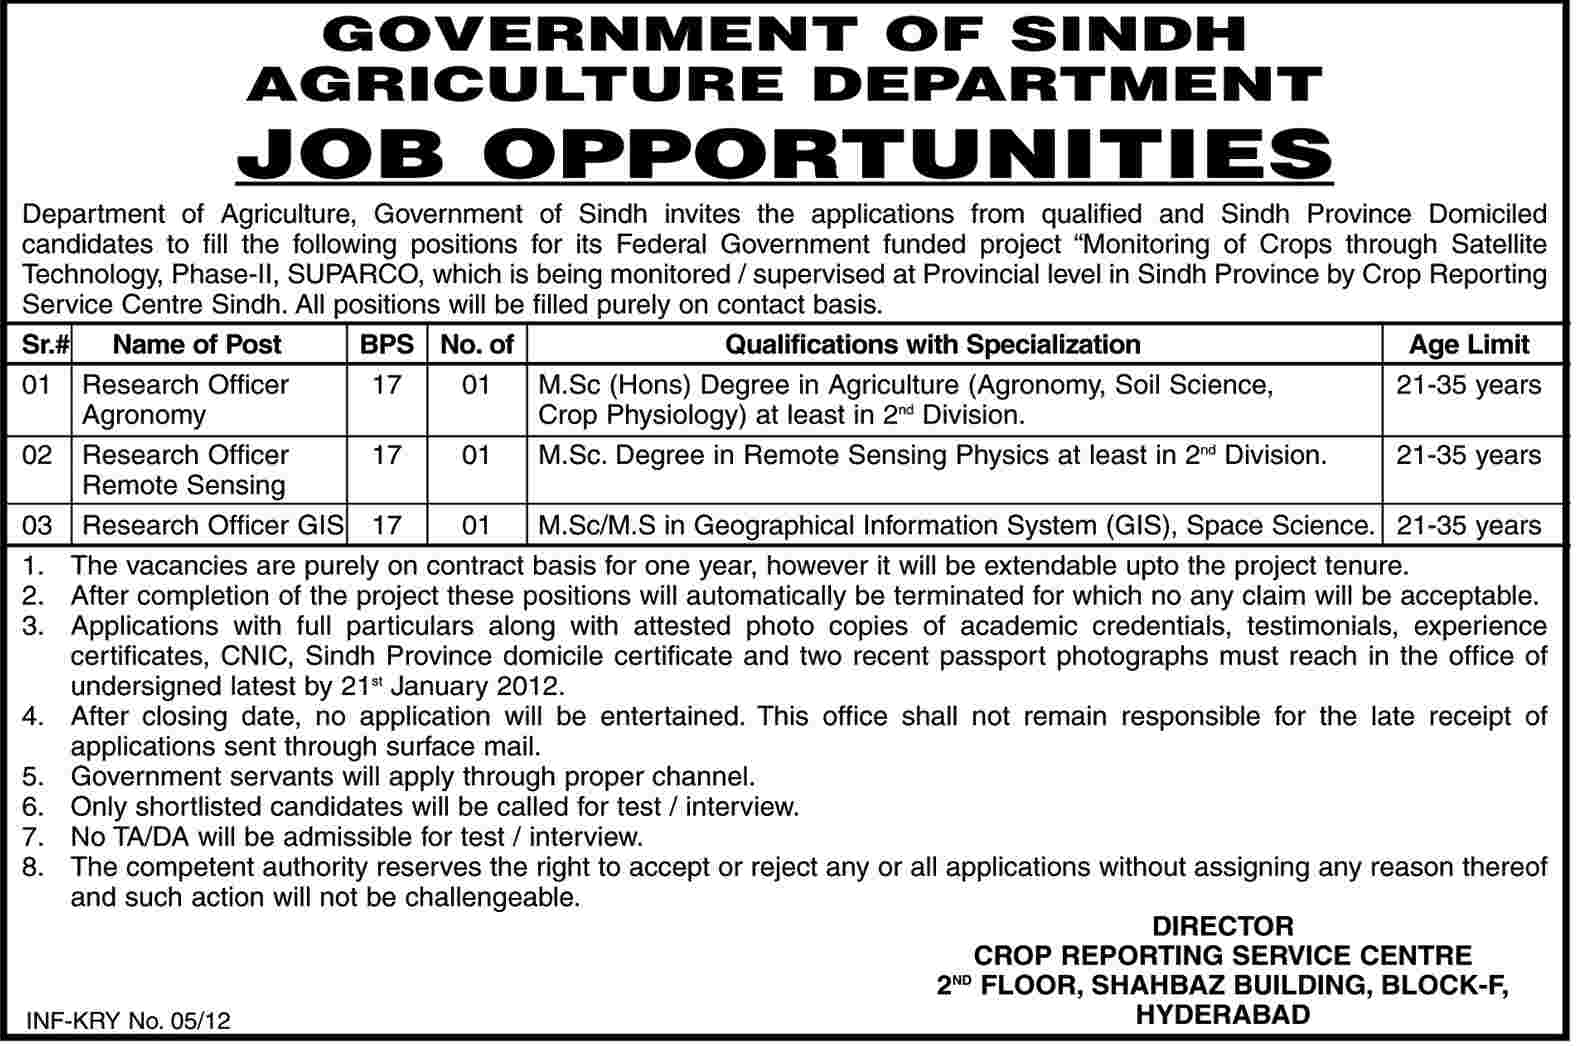 Agricultural Department, Government of Sindh Jobs Opportunity